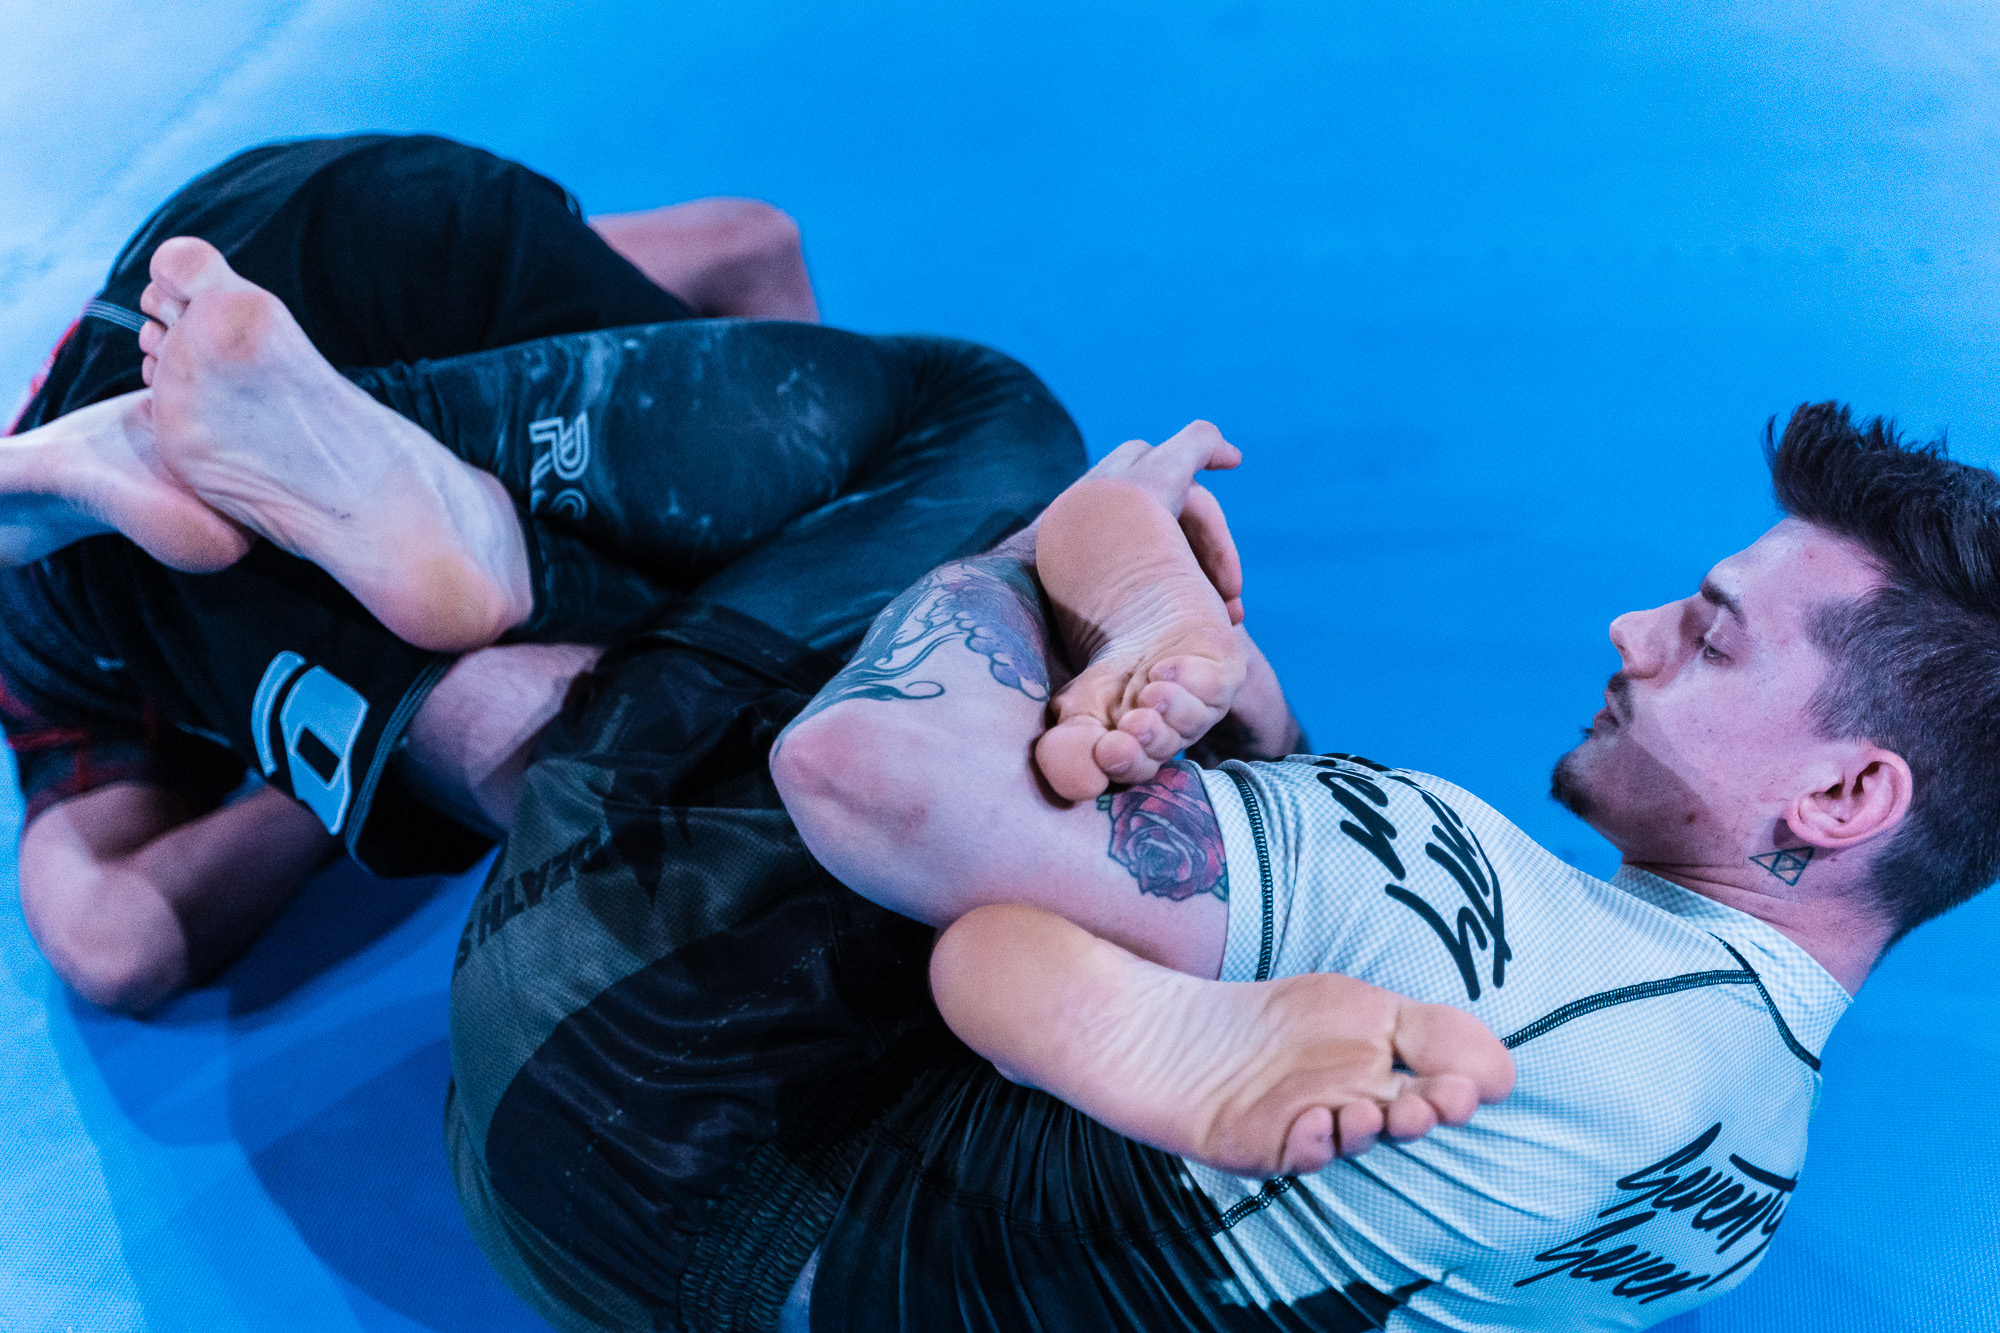 IBJJF New Heel Hook and Leg Reaping rules are Too Little Too Late